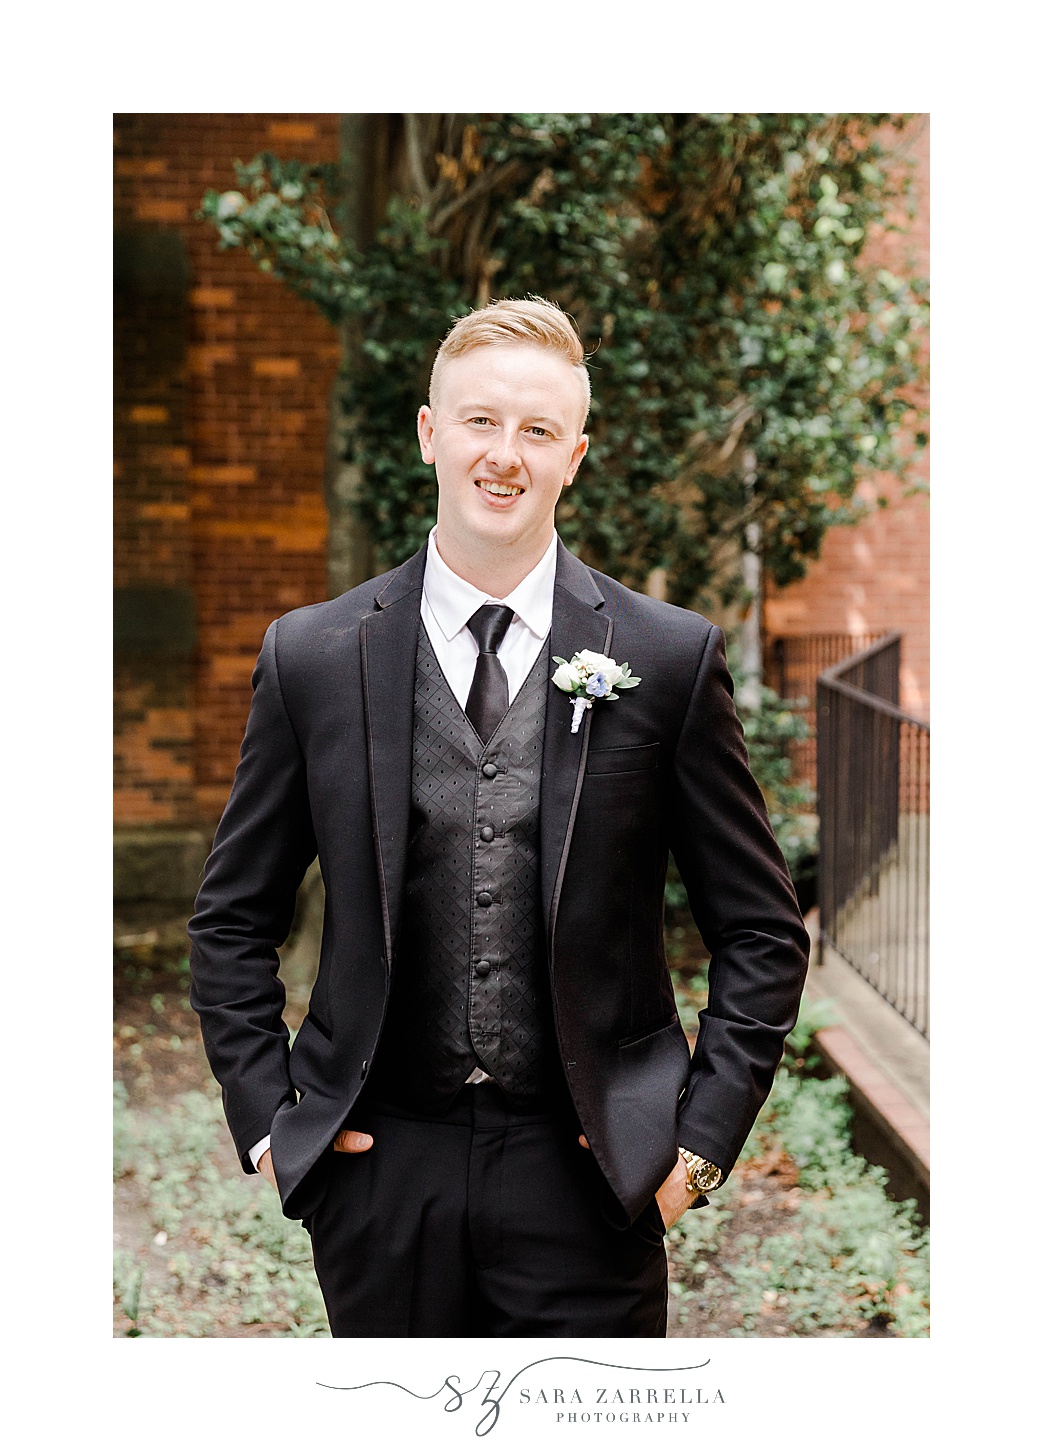 groom poses in black suit with white boutonnière for summer wedding